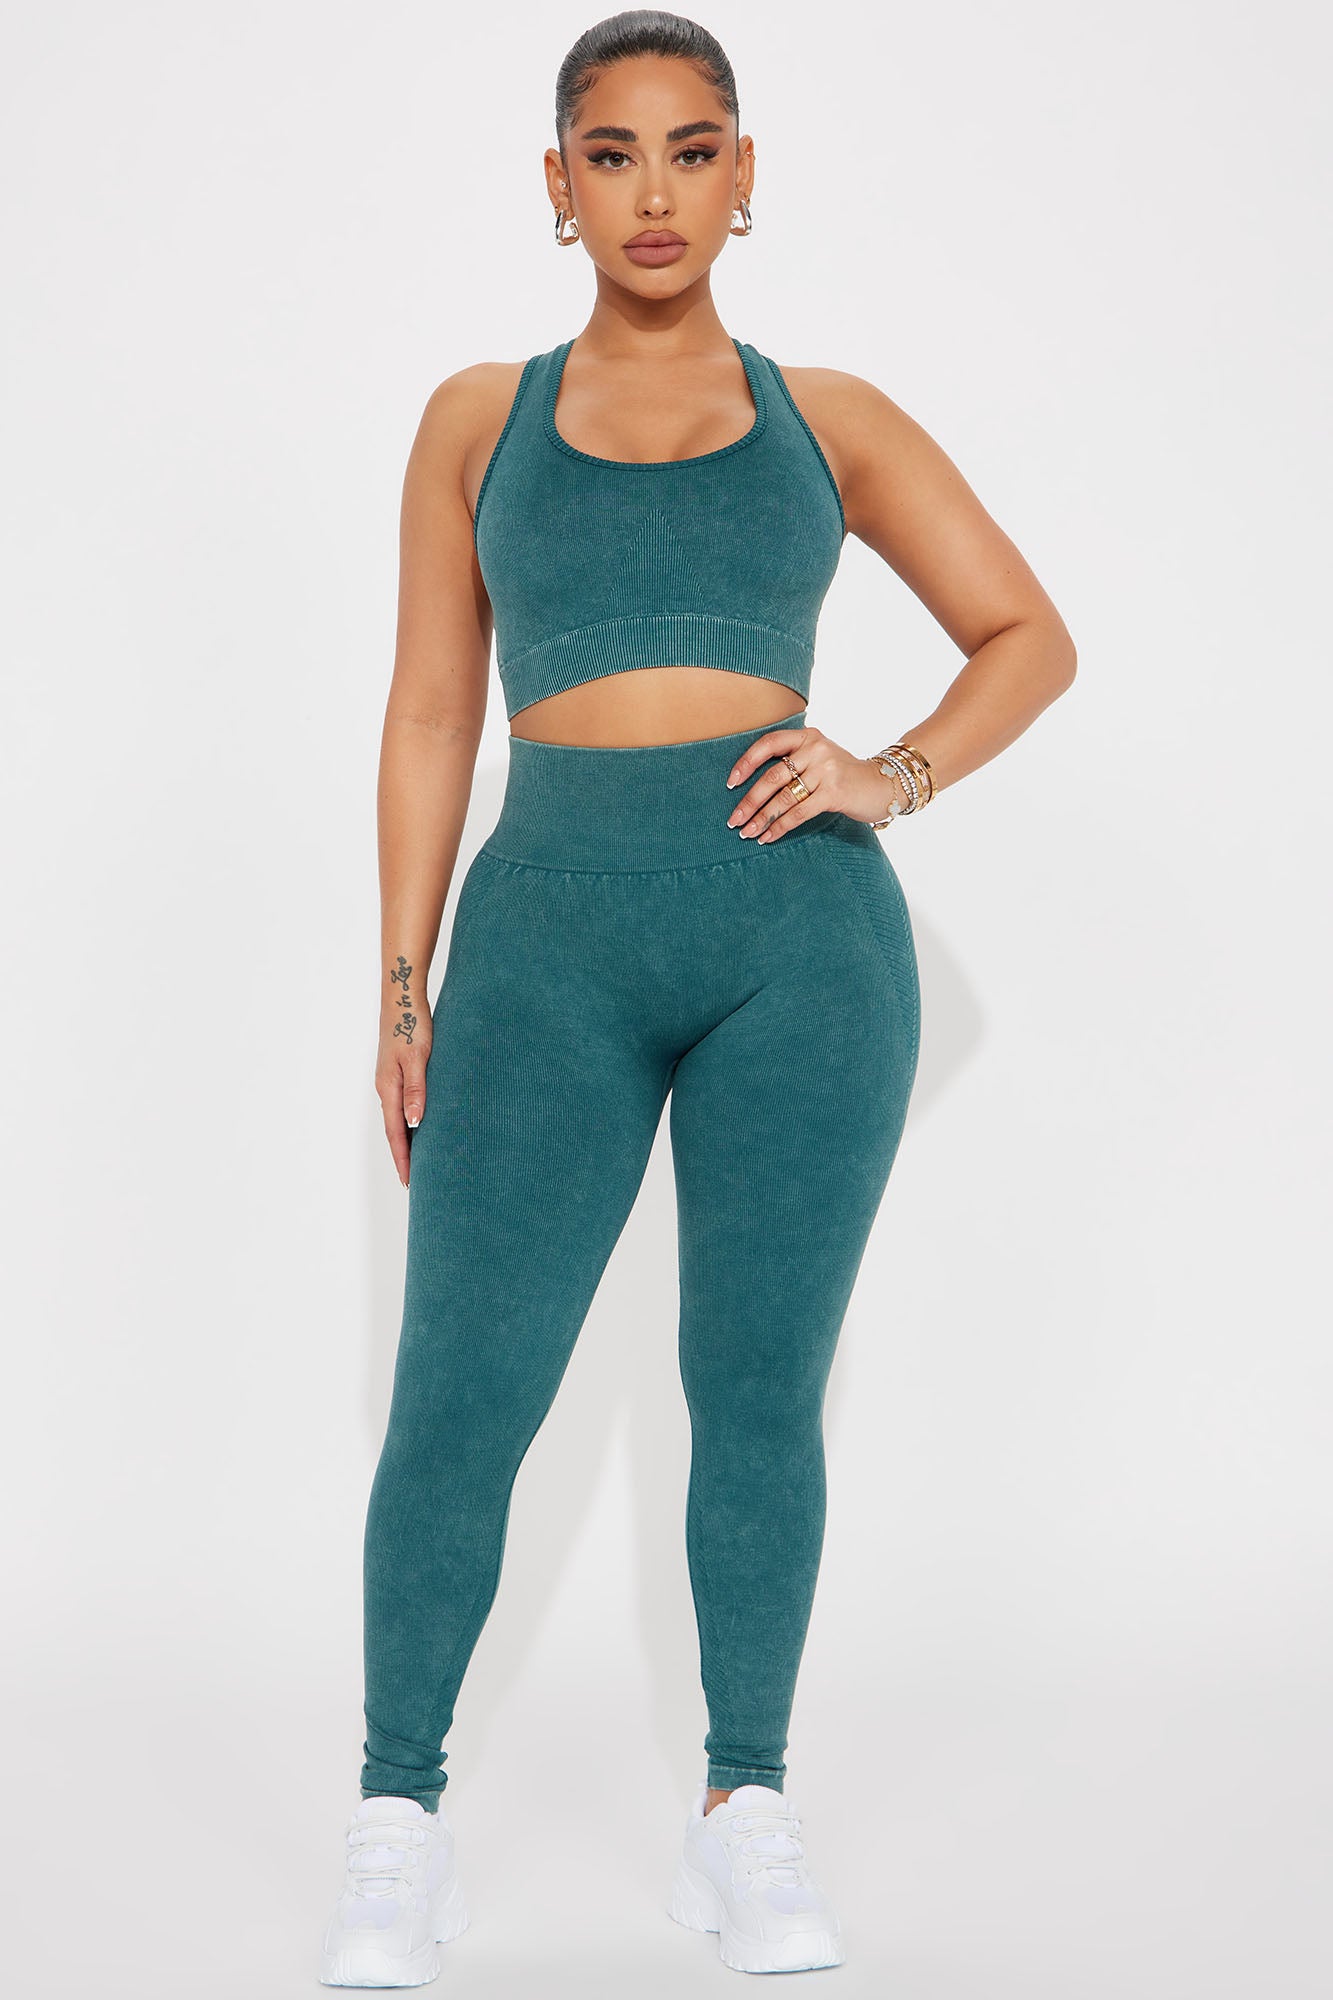 Teal Modishly Fitness Workout 3in1 Set Collection Chic, Stylish